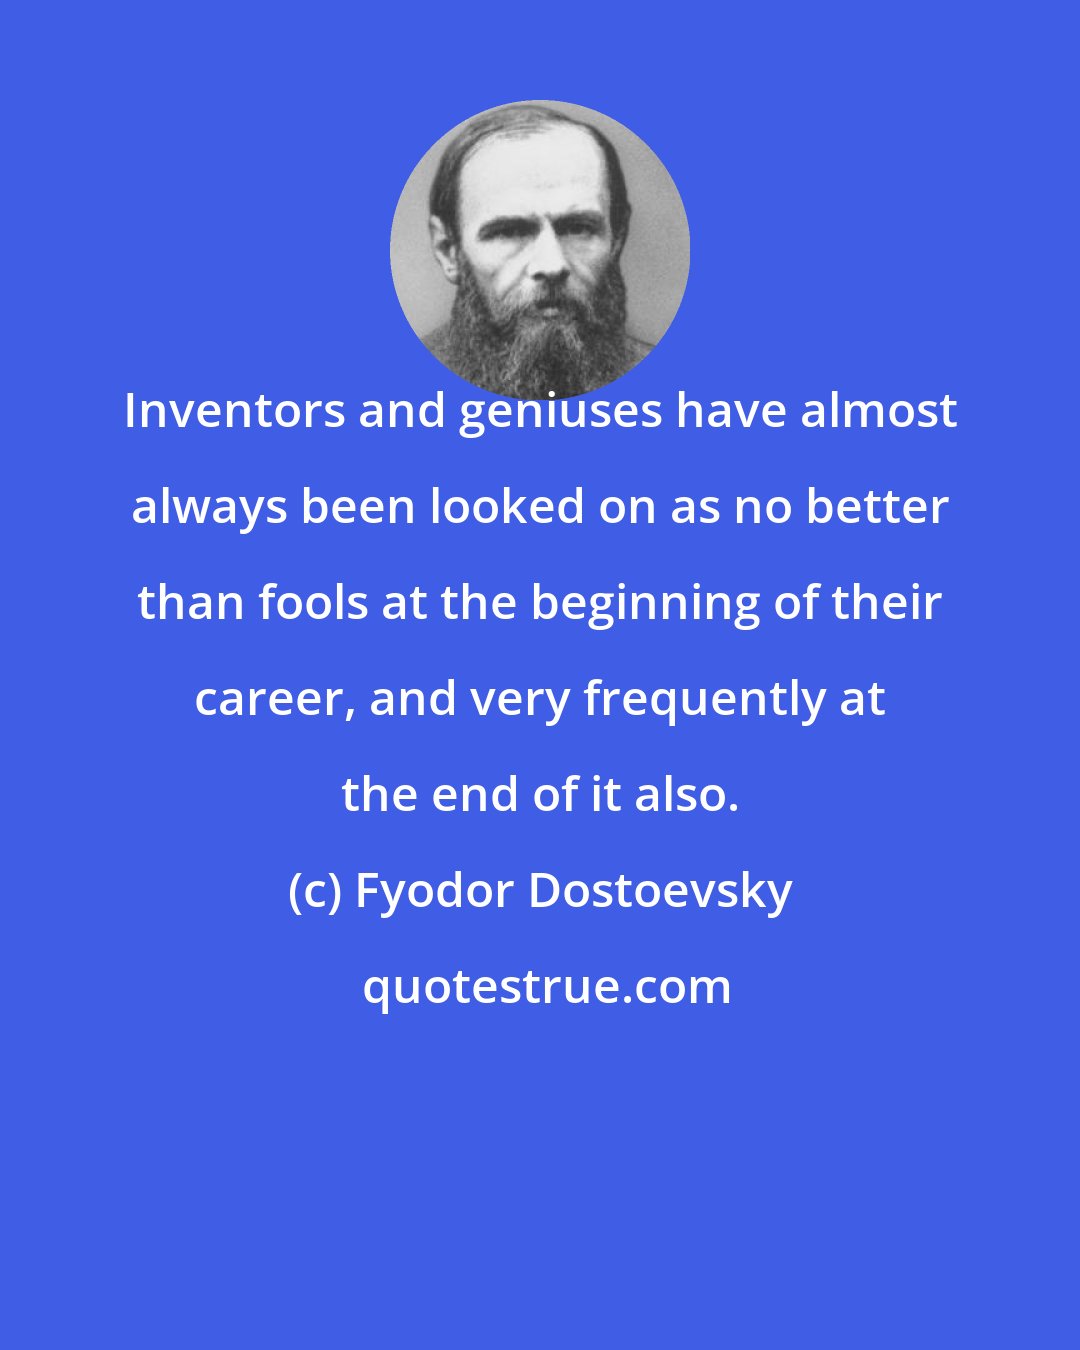 Fyodor Dostoevsky: Inventors and geniuses have almost always been looked on as no better than fools at the beginning of their career, and very frequently at the end of it also.